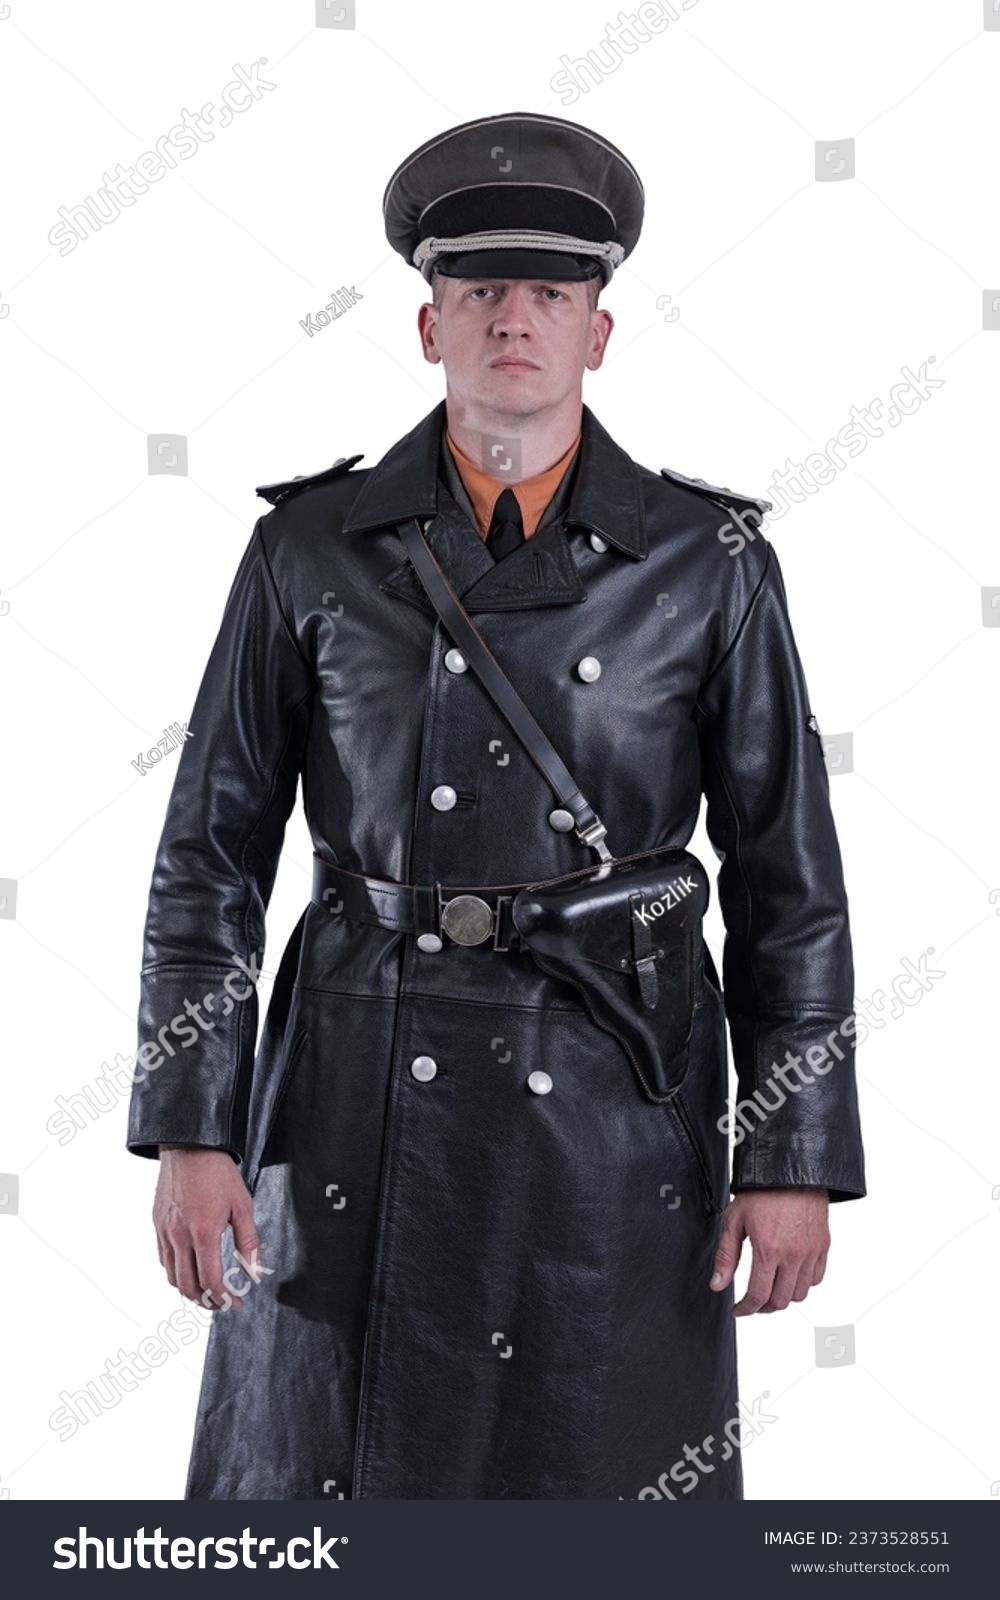 Male actor reenactor in historical uniform as an officer of the German Army during World War II #2373528551